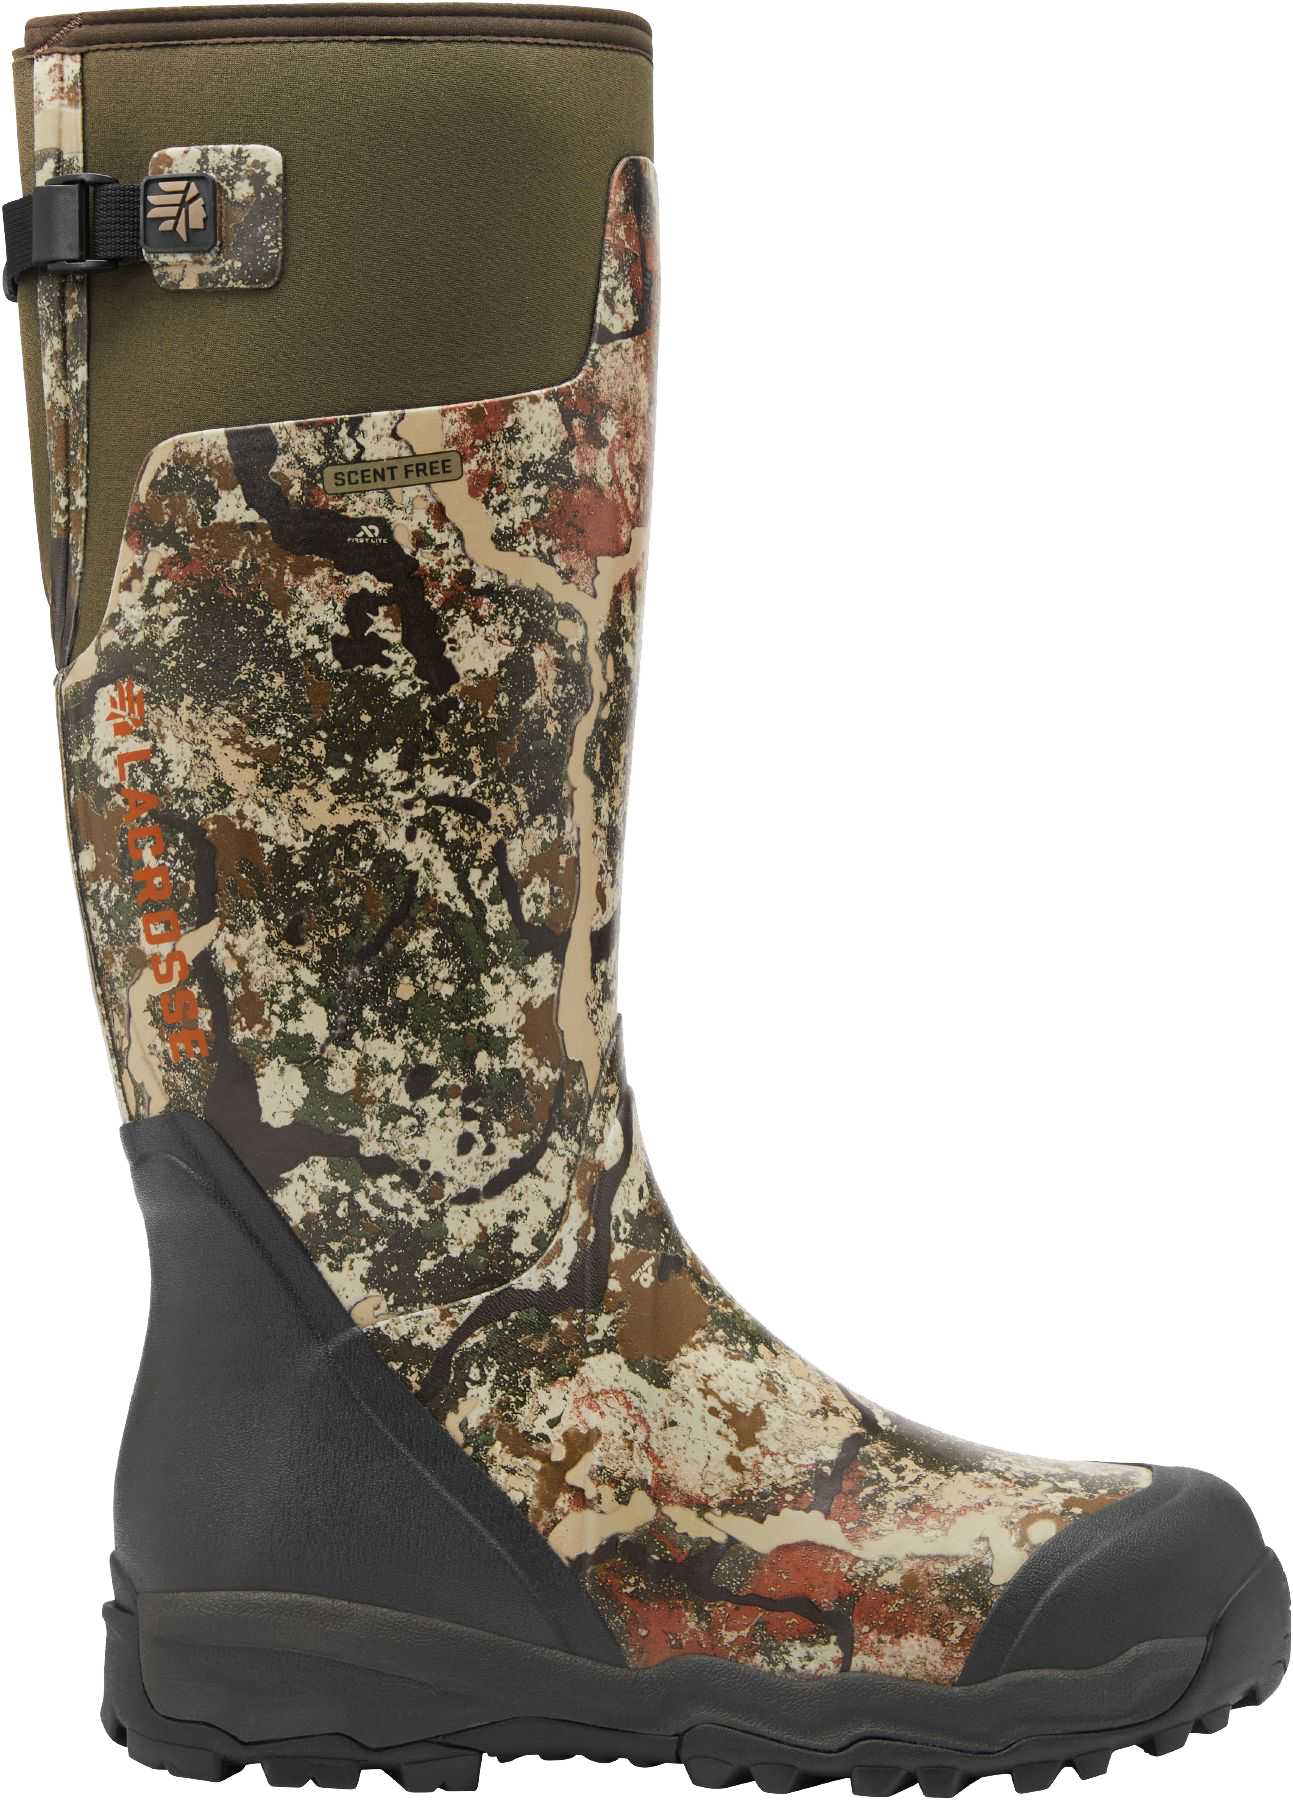 LaCrosse AlphaBurly Pro Hunting Boots for Men - First Lite Specter - 14M